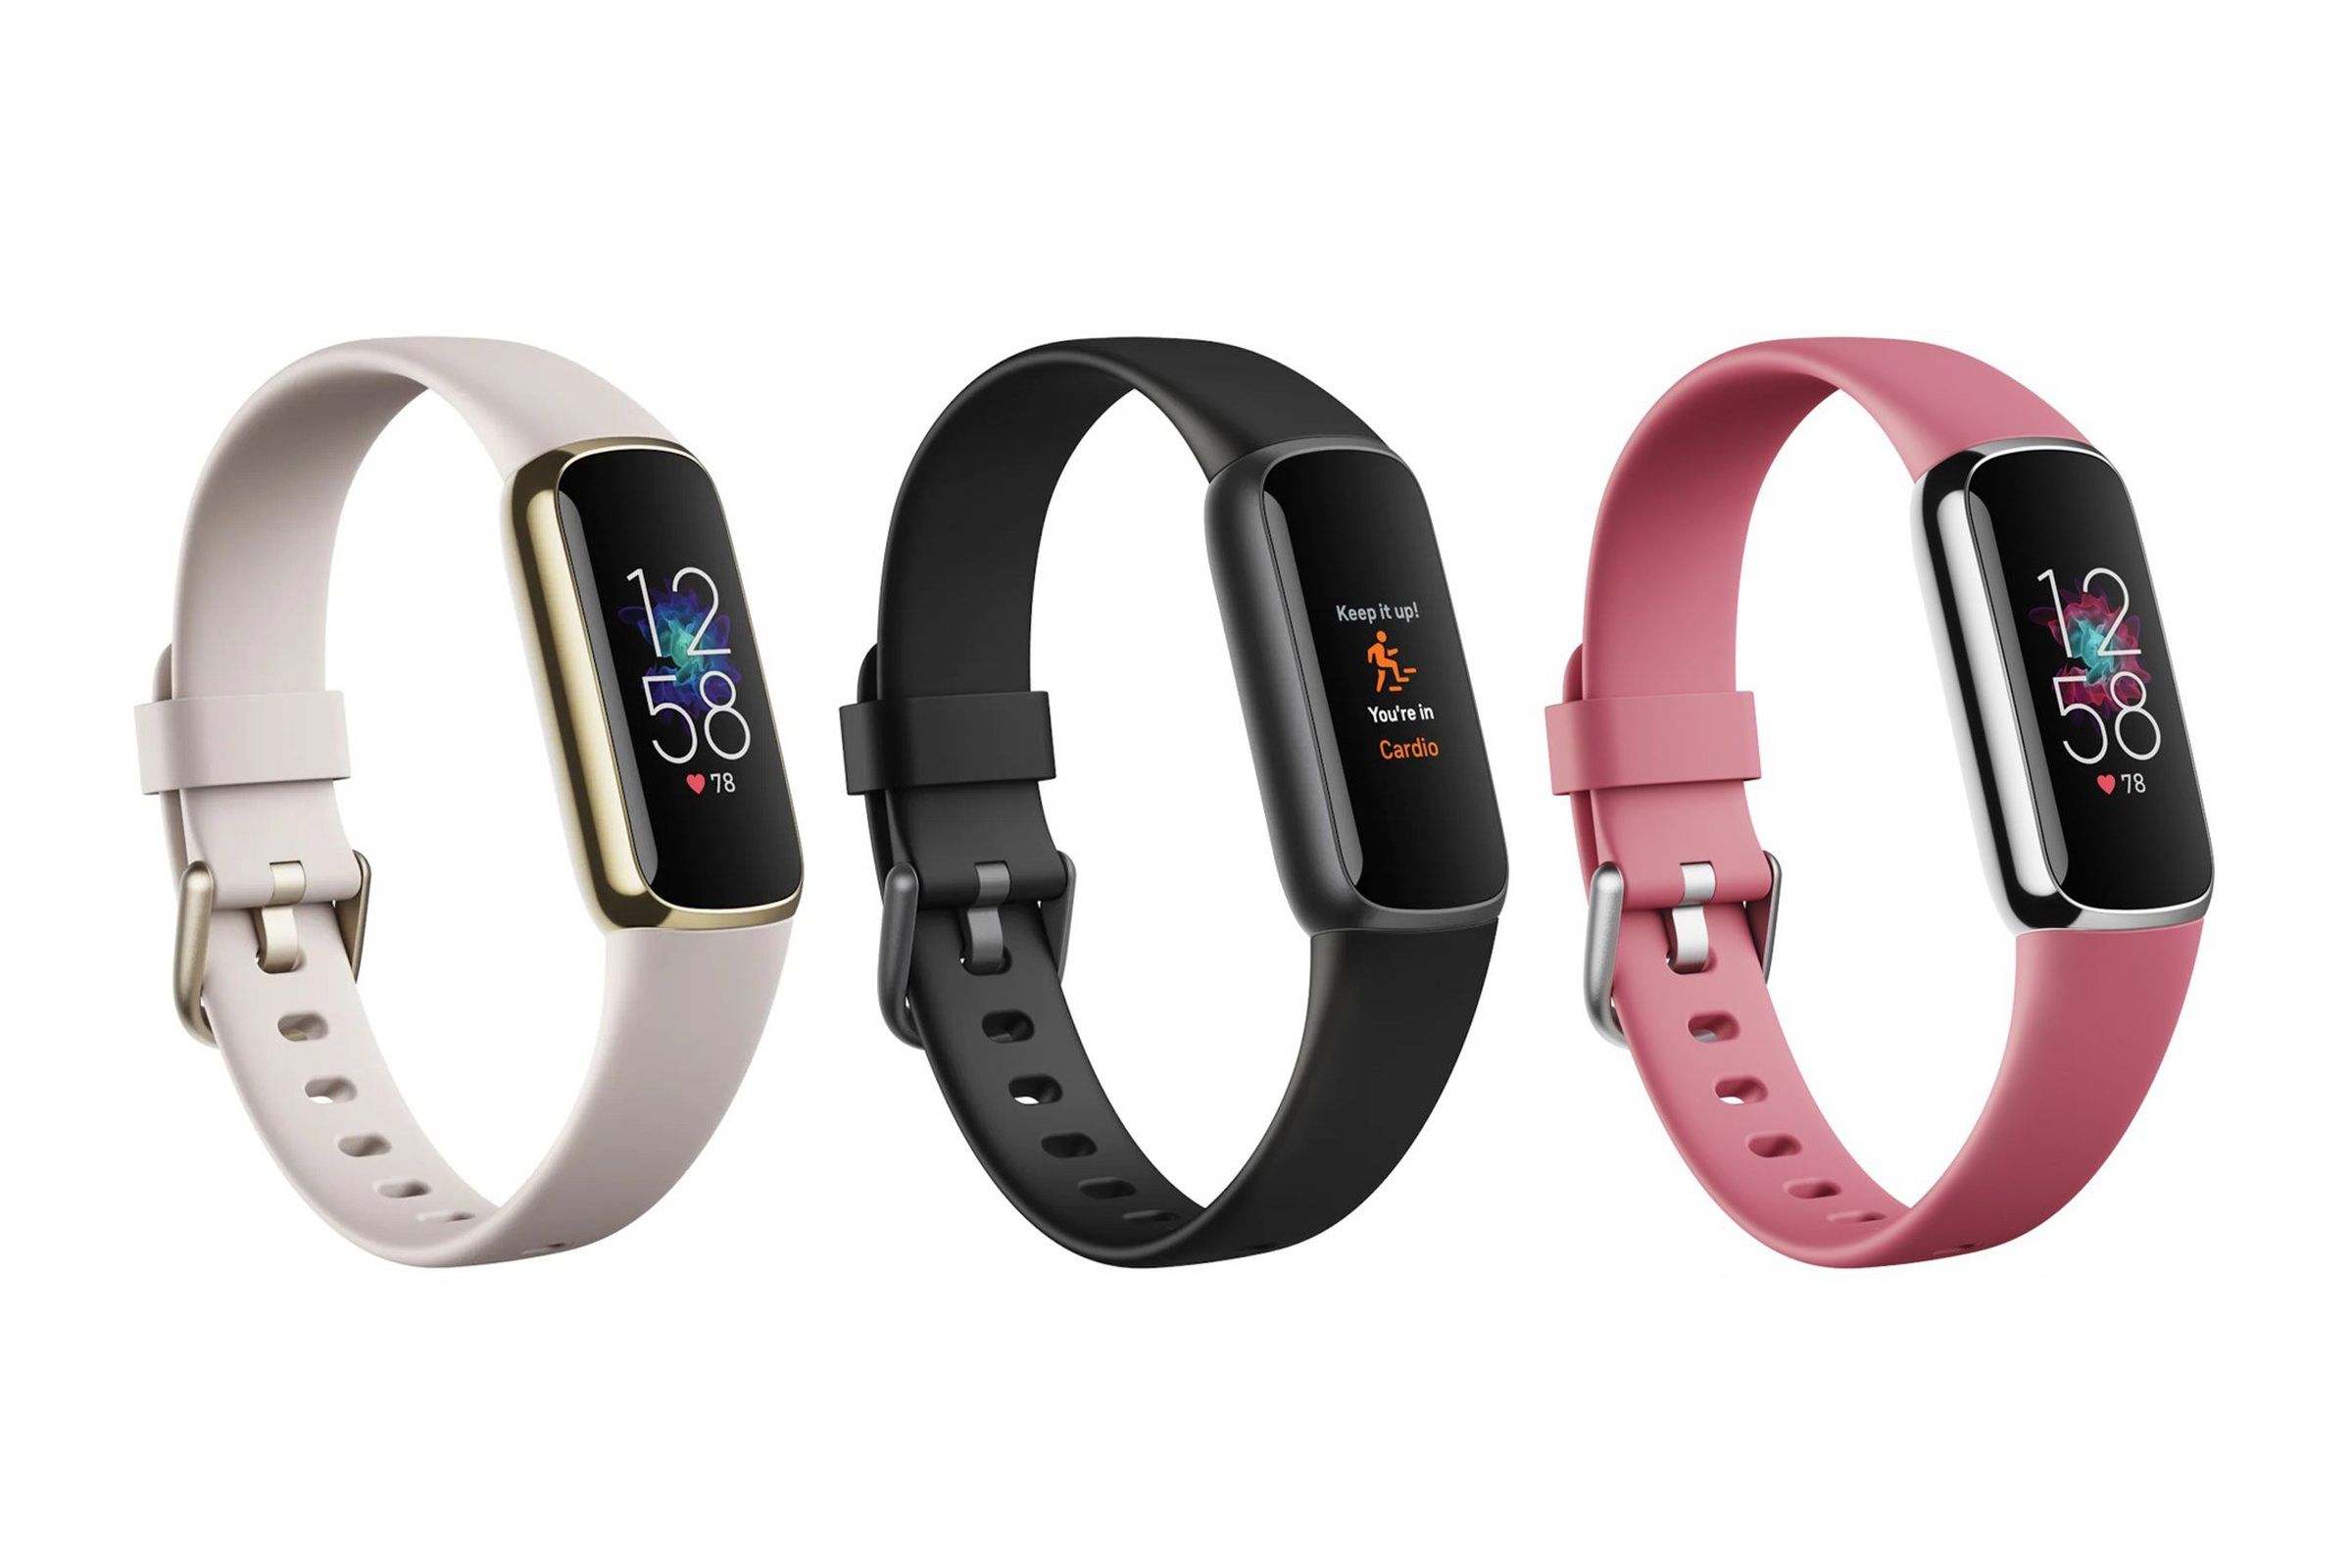 Image of the upcoming Fitbit Luxe showing three colors: gold, black, and silver.